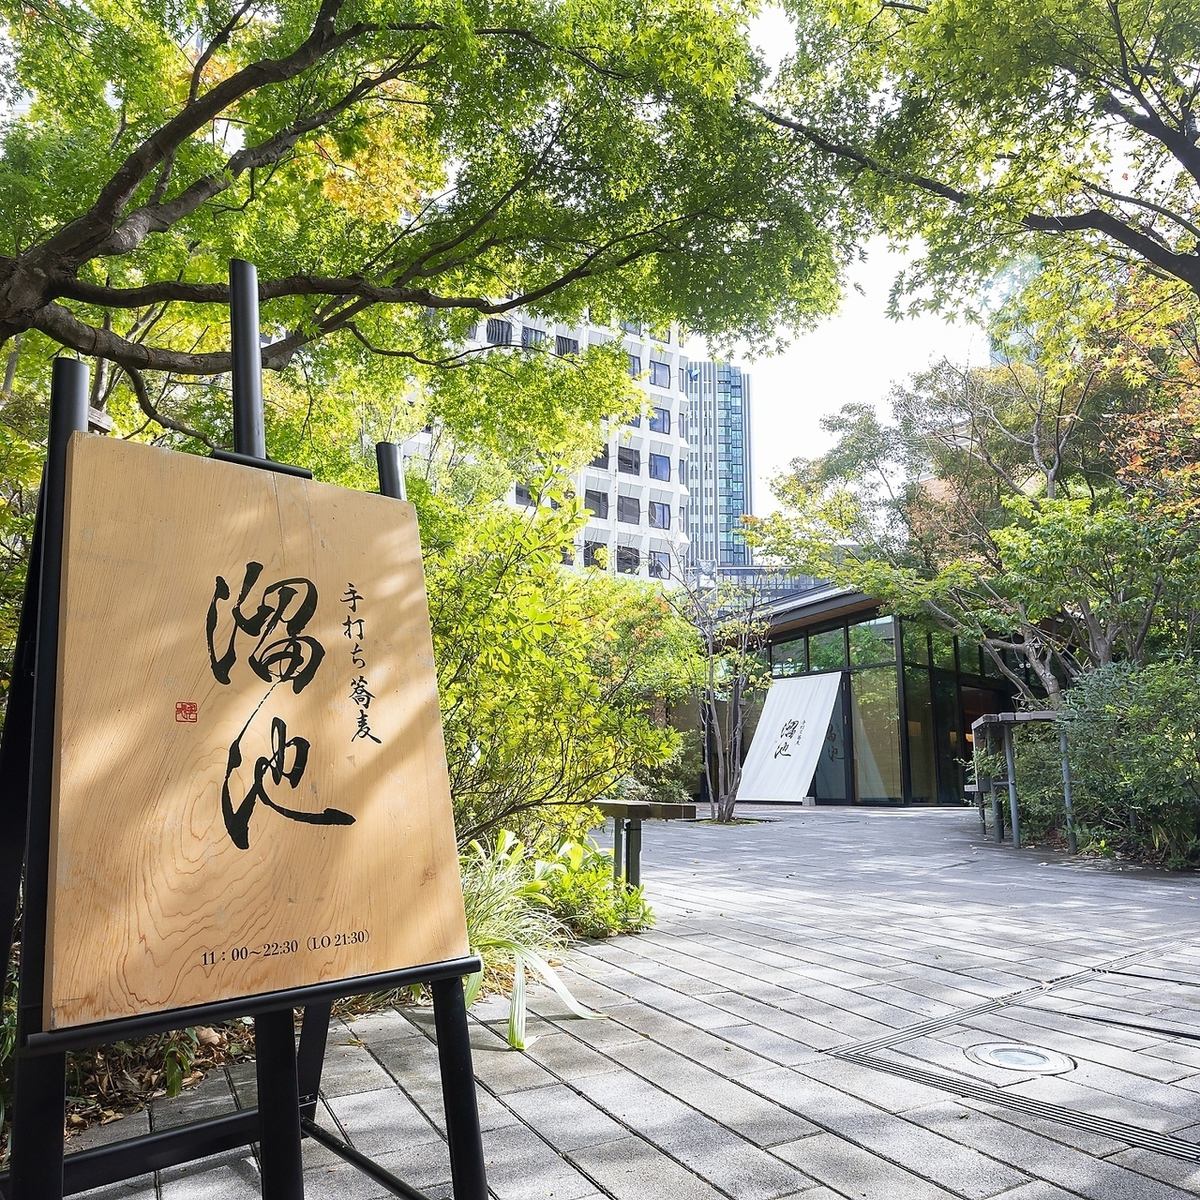 Enjoy authentic handmade soba noodles in the historic Tameike area.